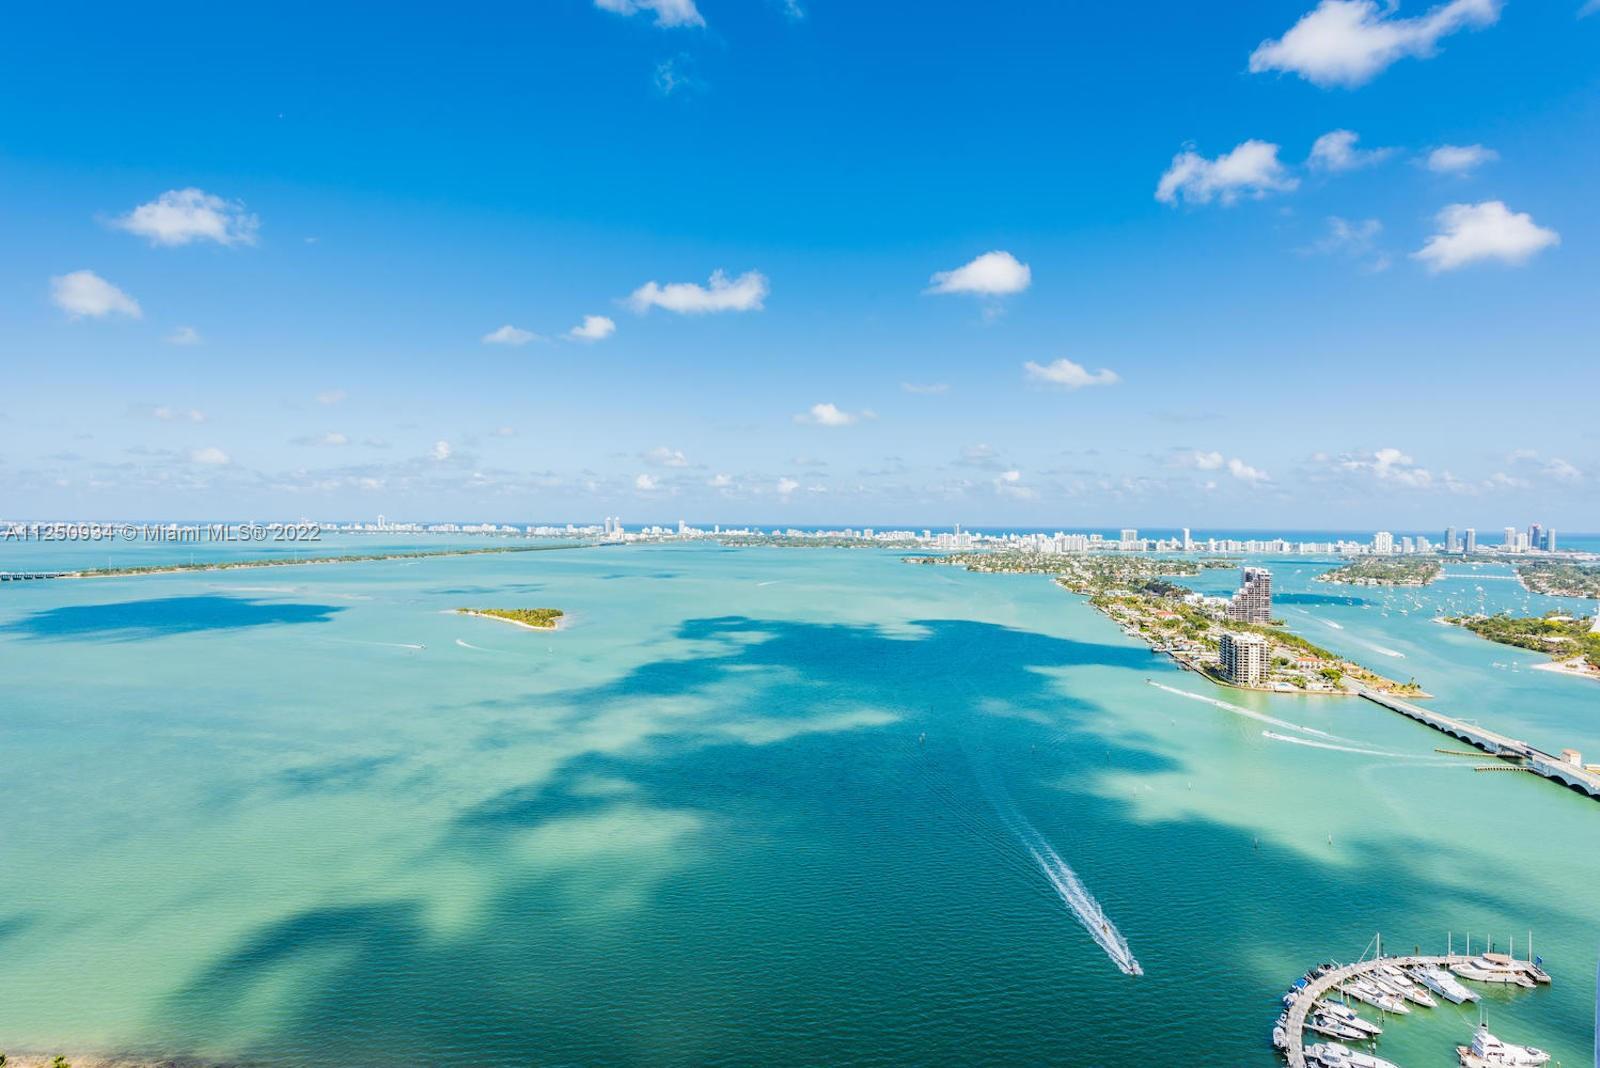 Beautiful unit 1/1 with unobstructed views of Biscayne Bay/Intercostal, at desirable Opera Tower Bui